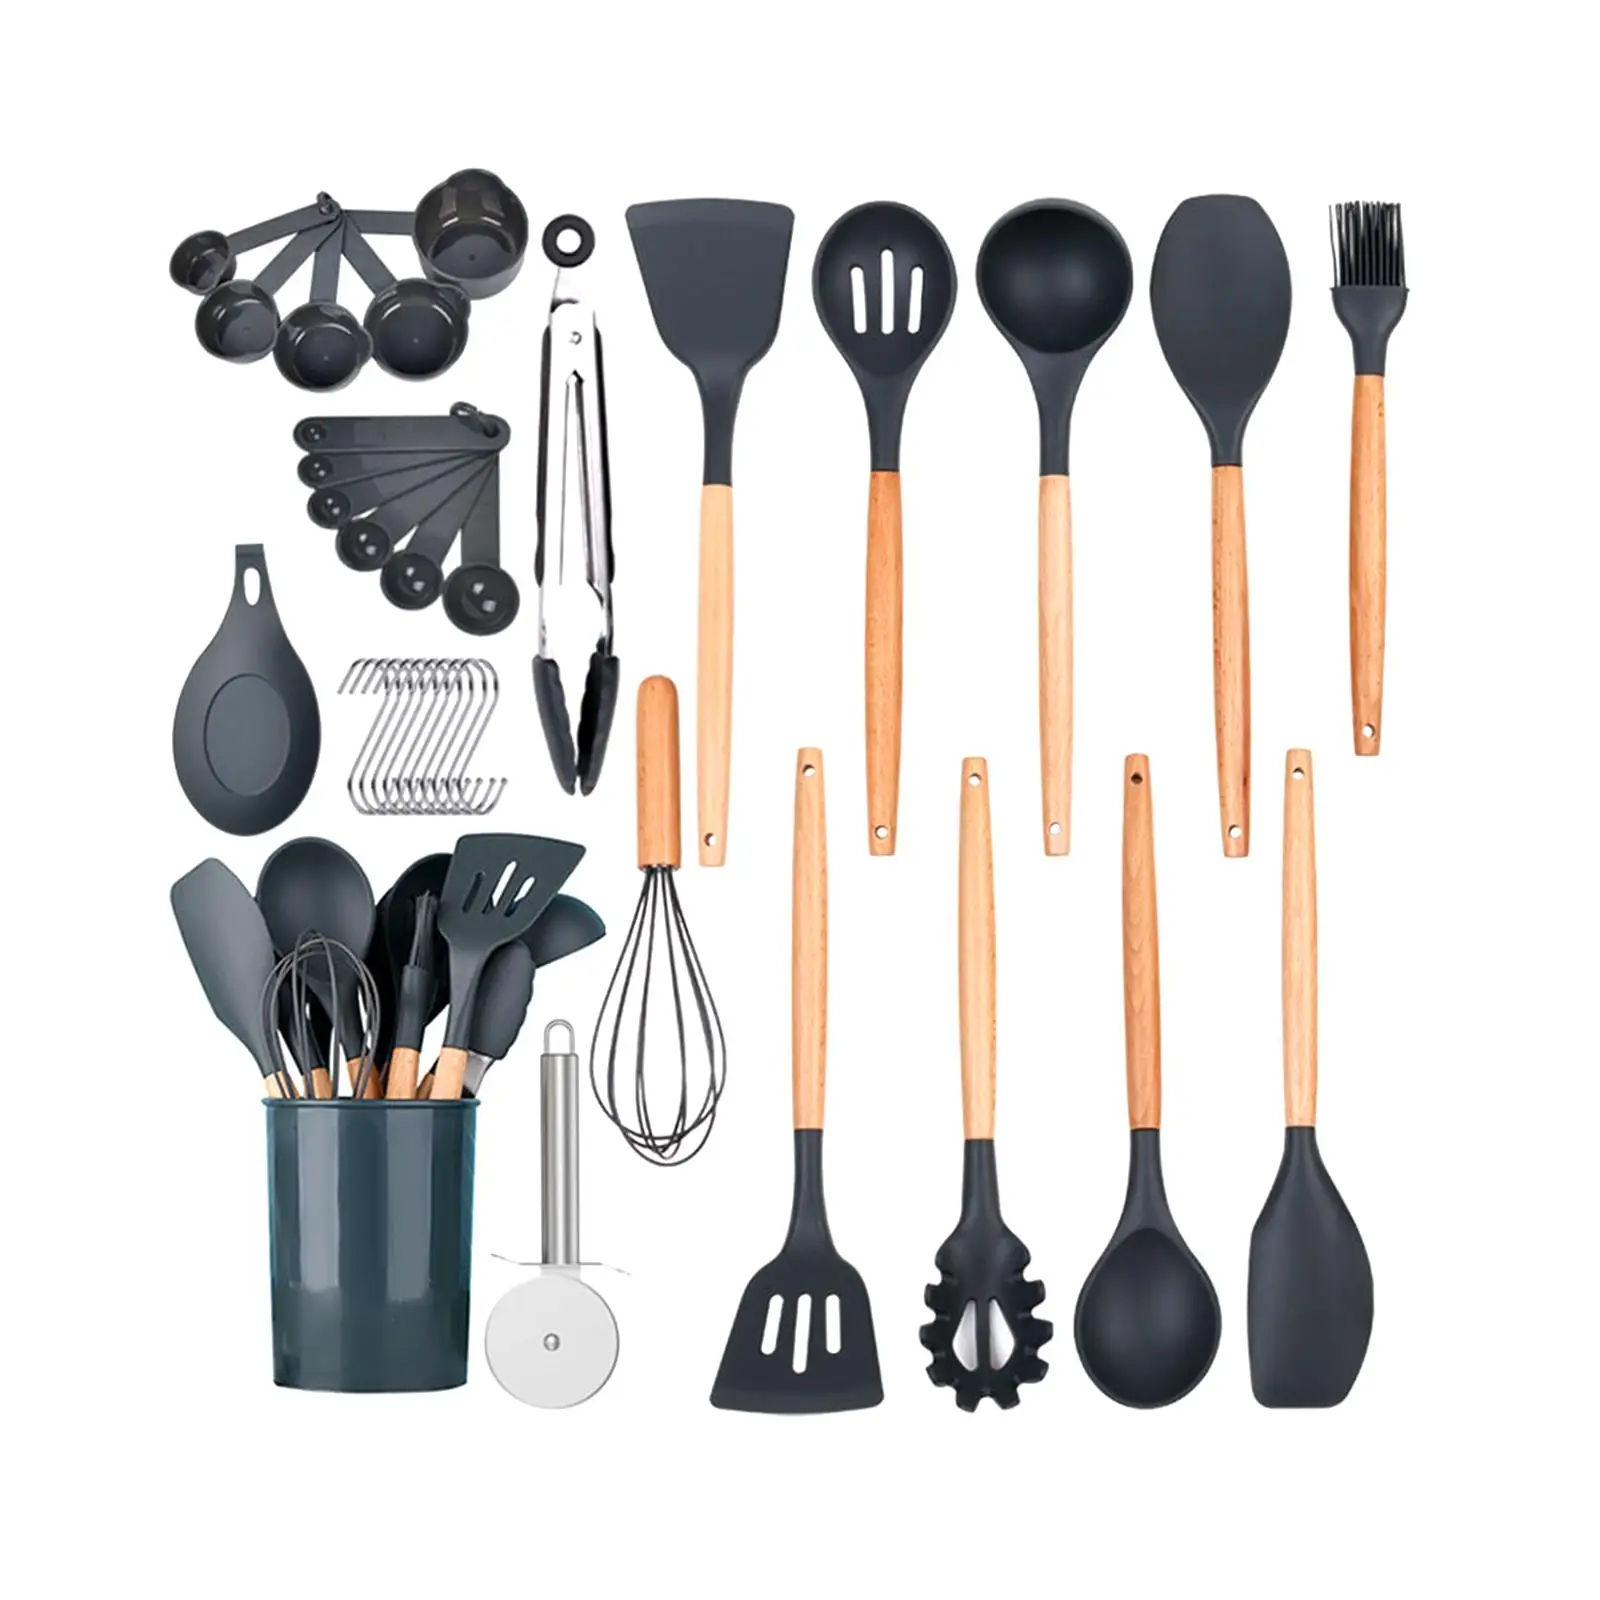 35x Multifunctional Kitchen Gadgets Cookware Set Cookware Whisk with Holder Heat Resistant Spoon Brush for Professionals